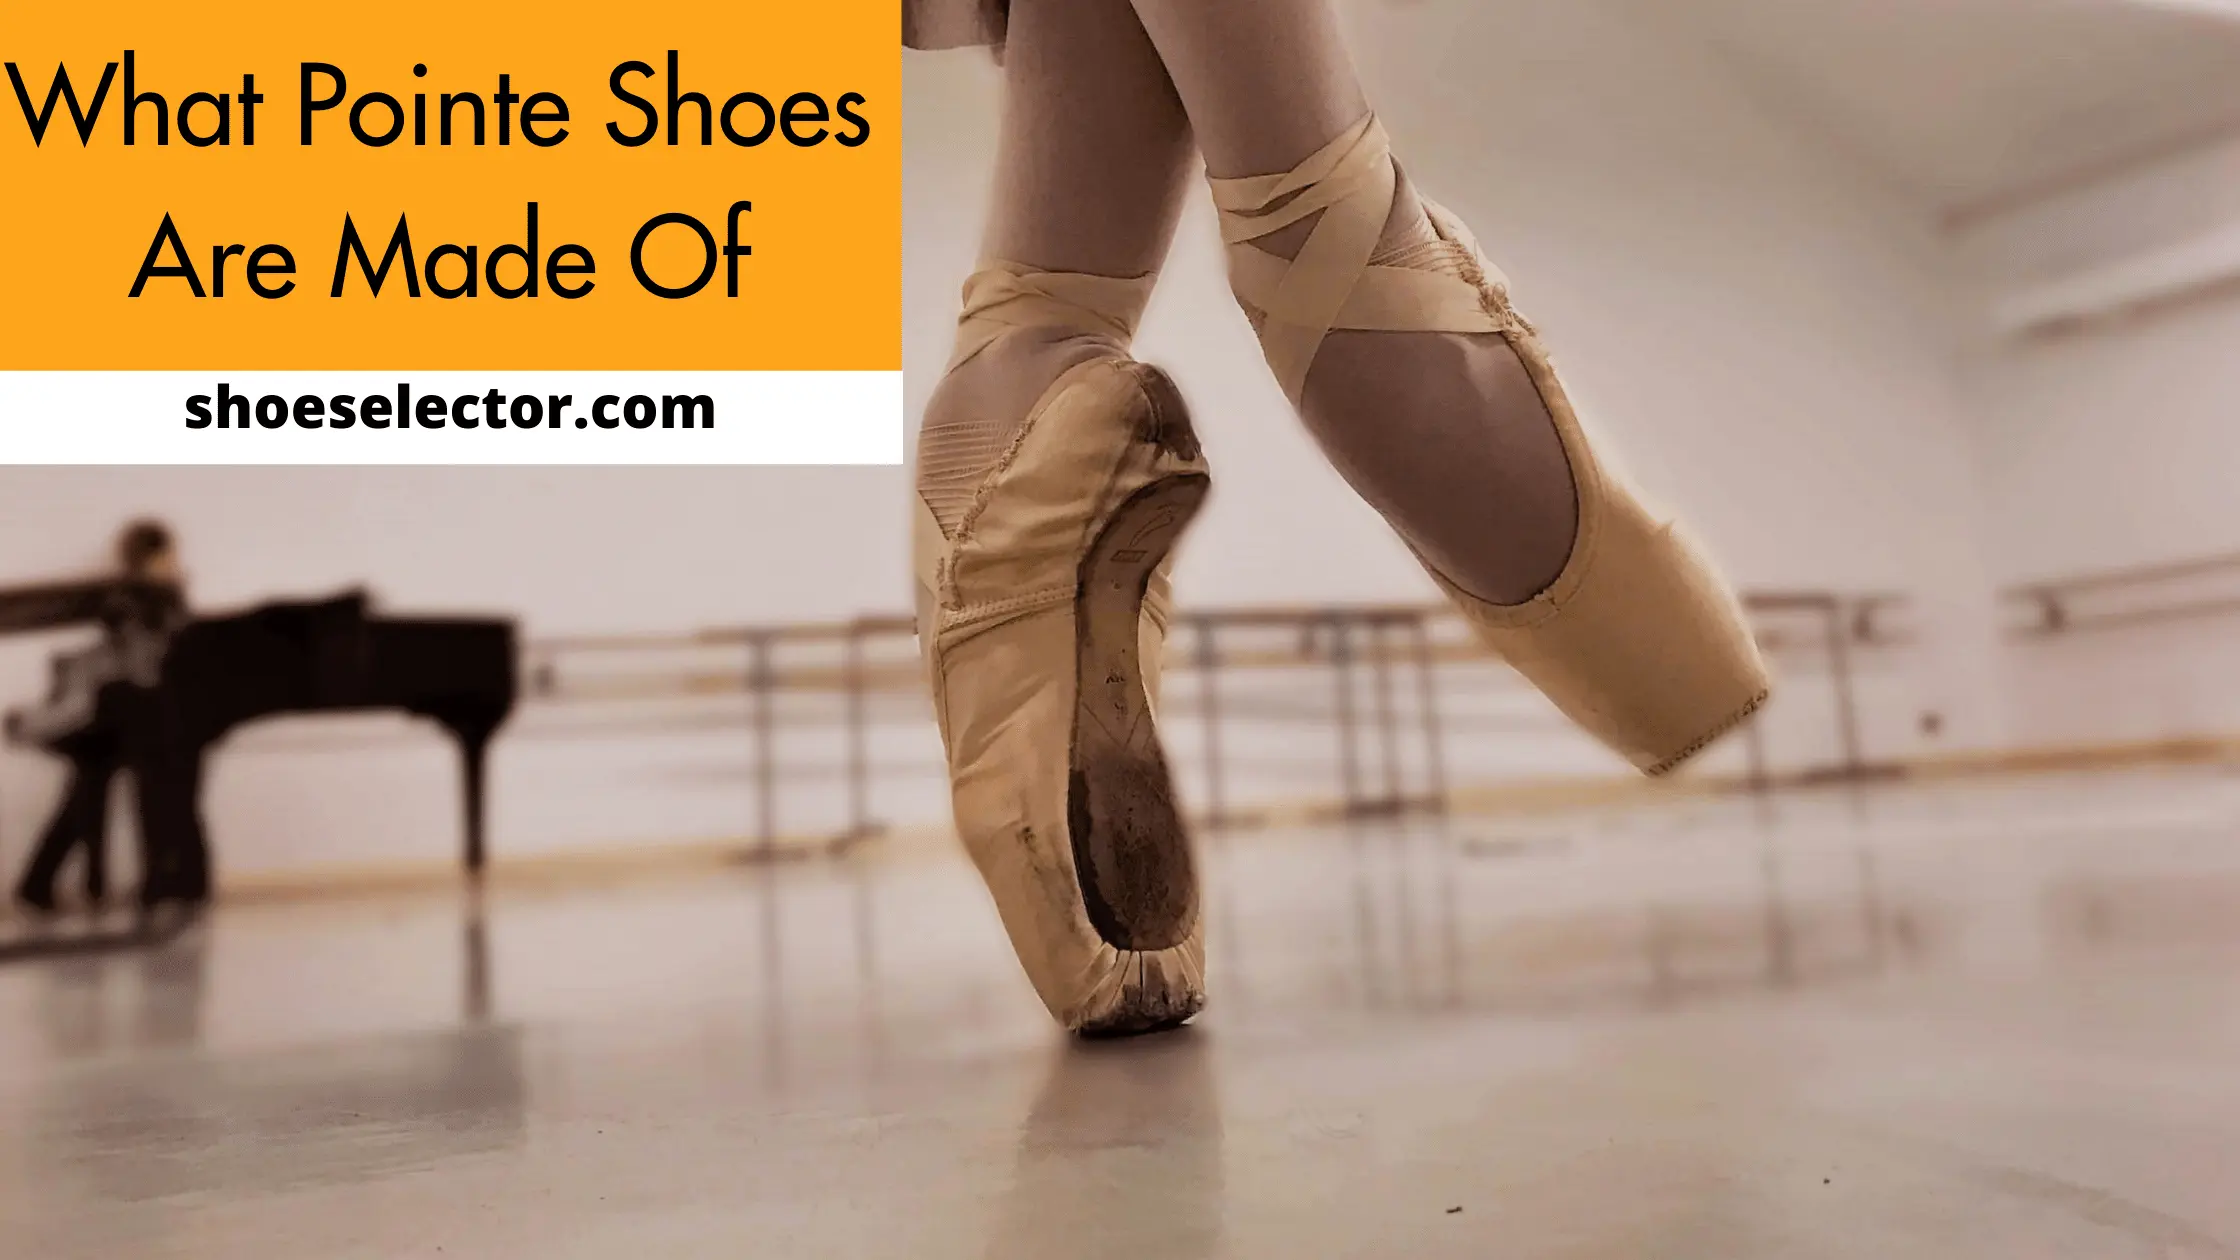 What Pointe Shoes Are Made Of?